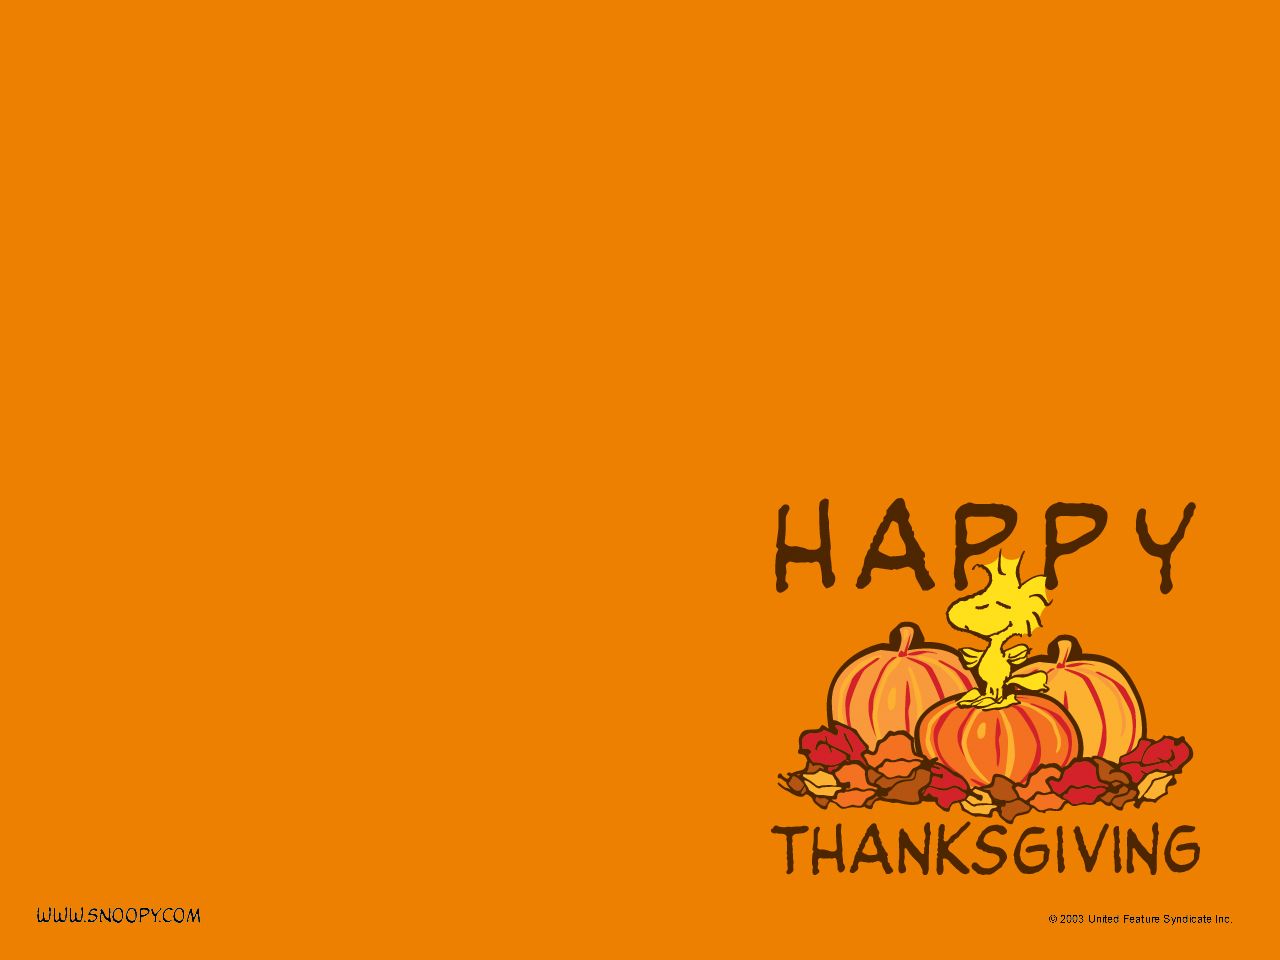 10 Thanksgiving wallpapers to be thankful for - Design Reviver